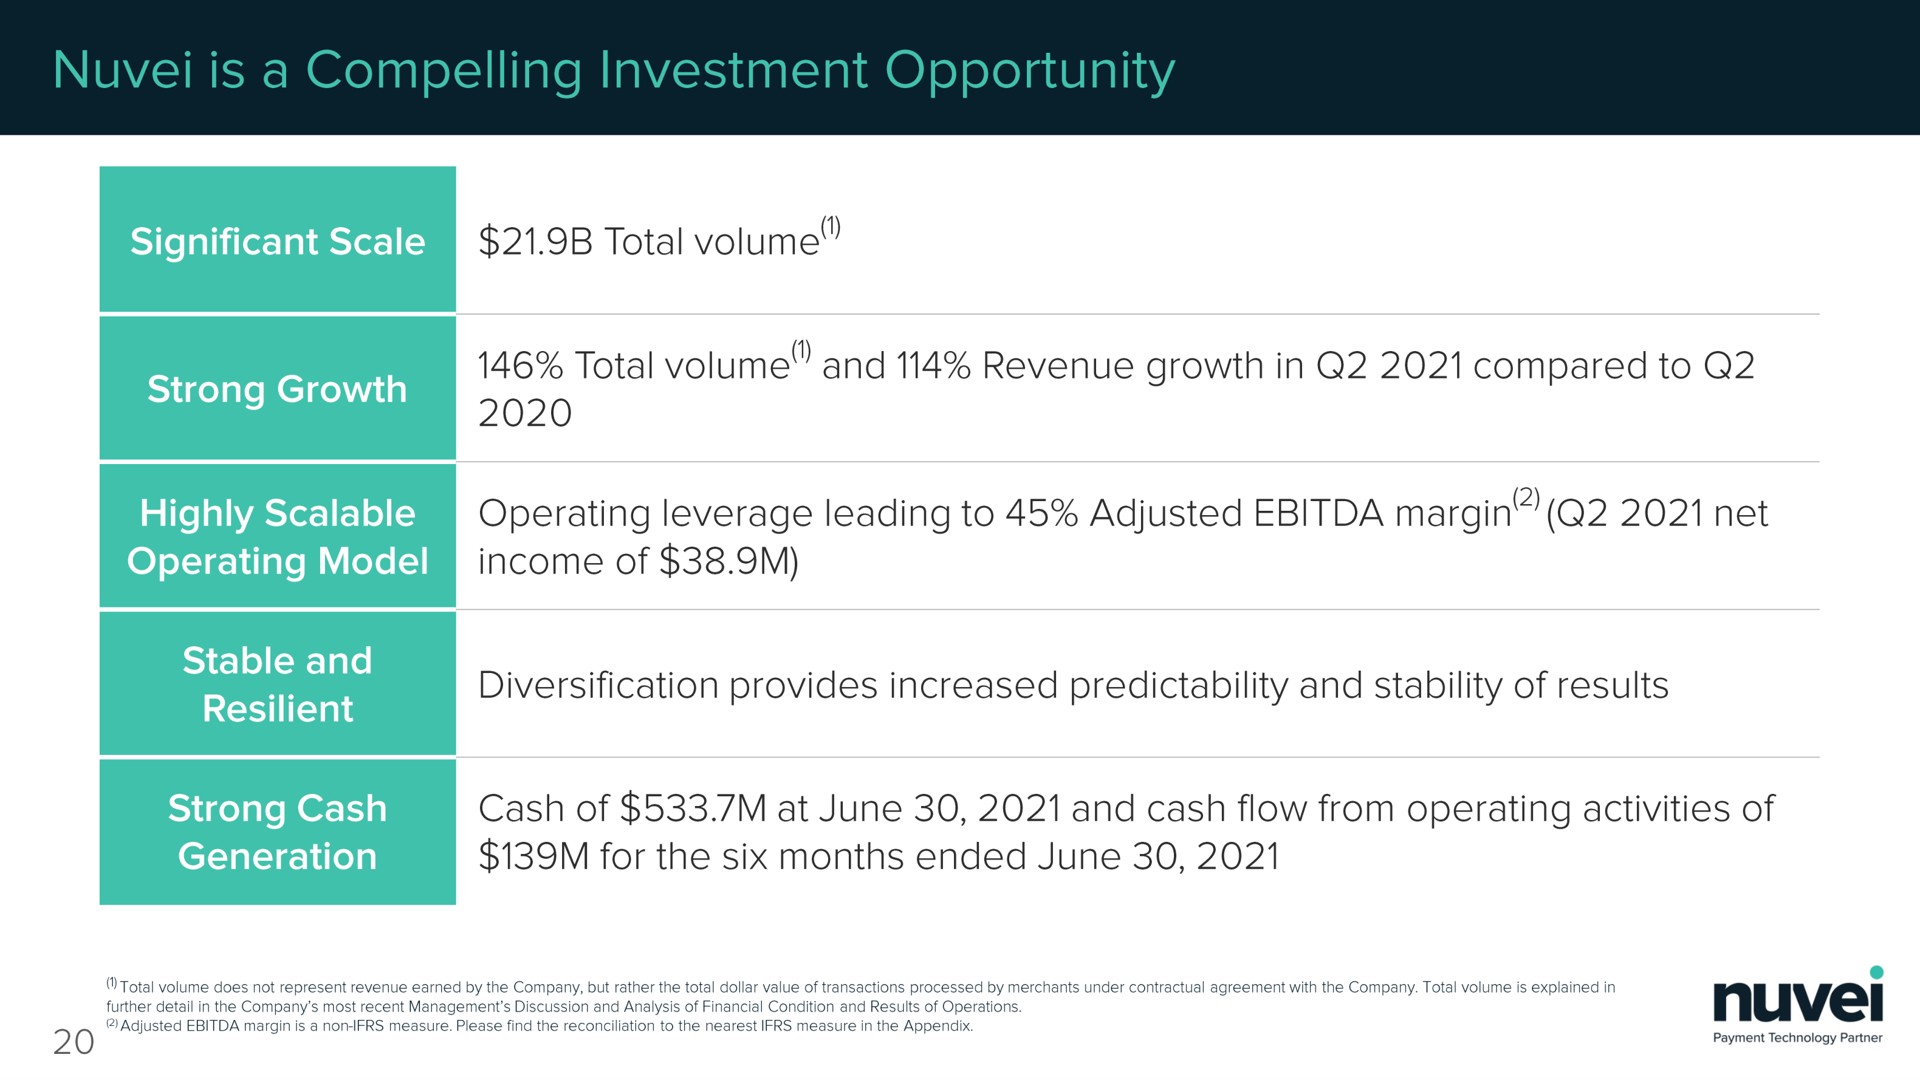 total volume total volume and revenue growth in compared to is operating model operating leverage leading to adjusted margin net stable and resilient diversification provides increased predictability and stability of results strong cash generation cash of at june and cash flow from operating activities of for the six months ended june | Nuvei